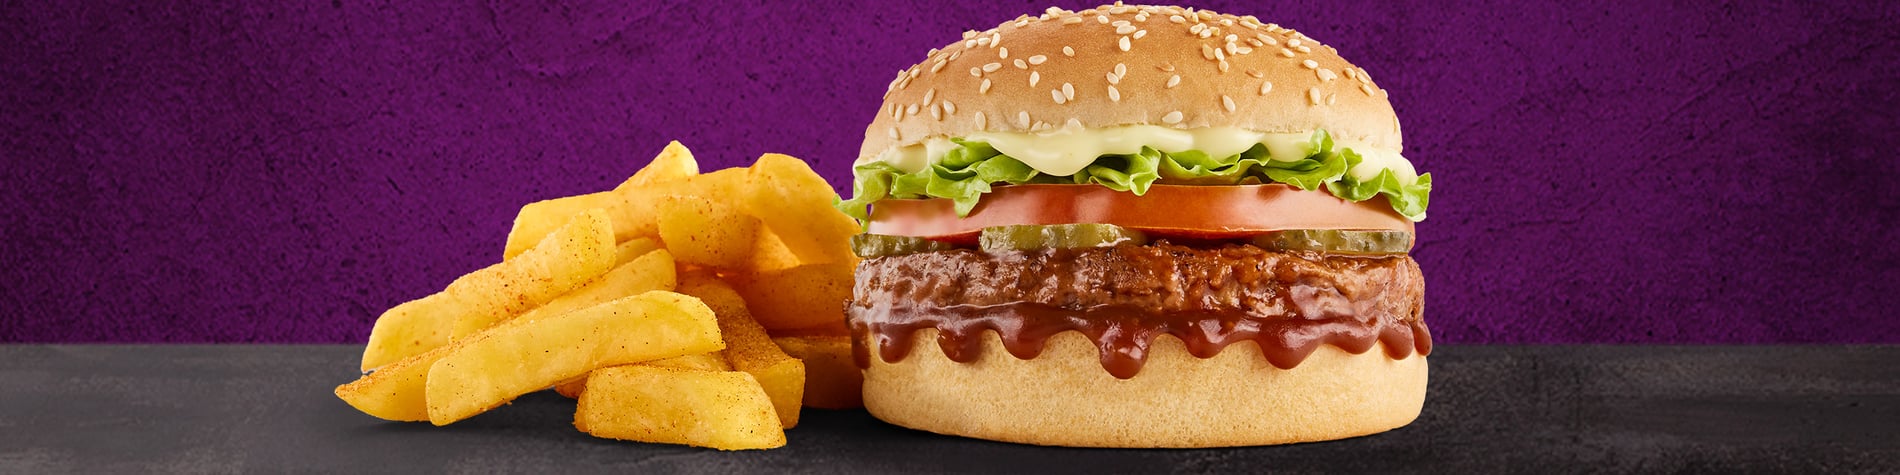 The NEW Mo’MjojoTM Burger Meal from Steers® TotalEnergies Standerton. 2 Flame-Grilled pure beef patties, pineapple, macon, tomato, lettuce, and small Famous Hand-Cut Chips, on a purple background.